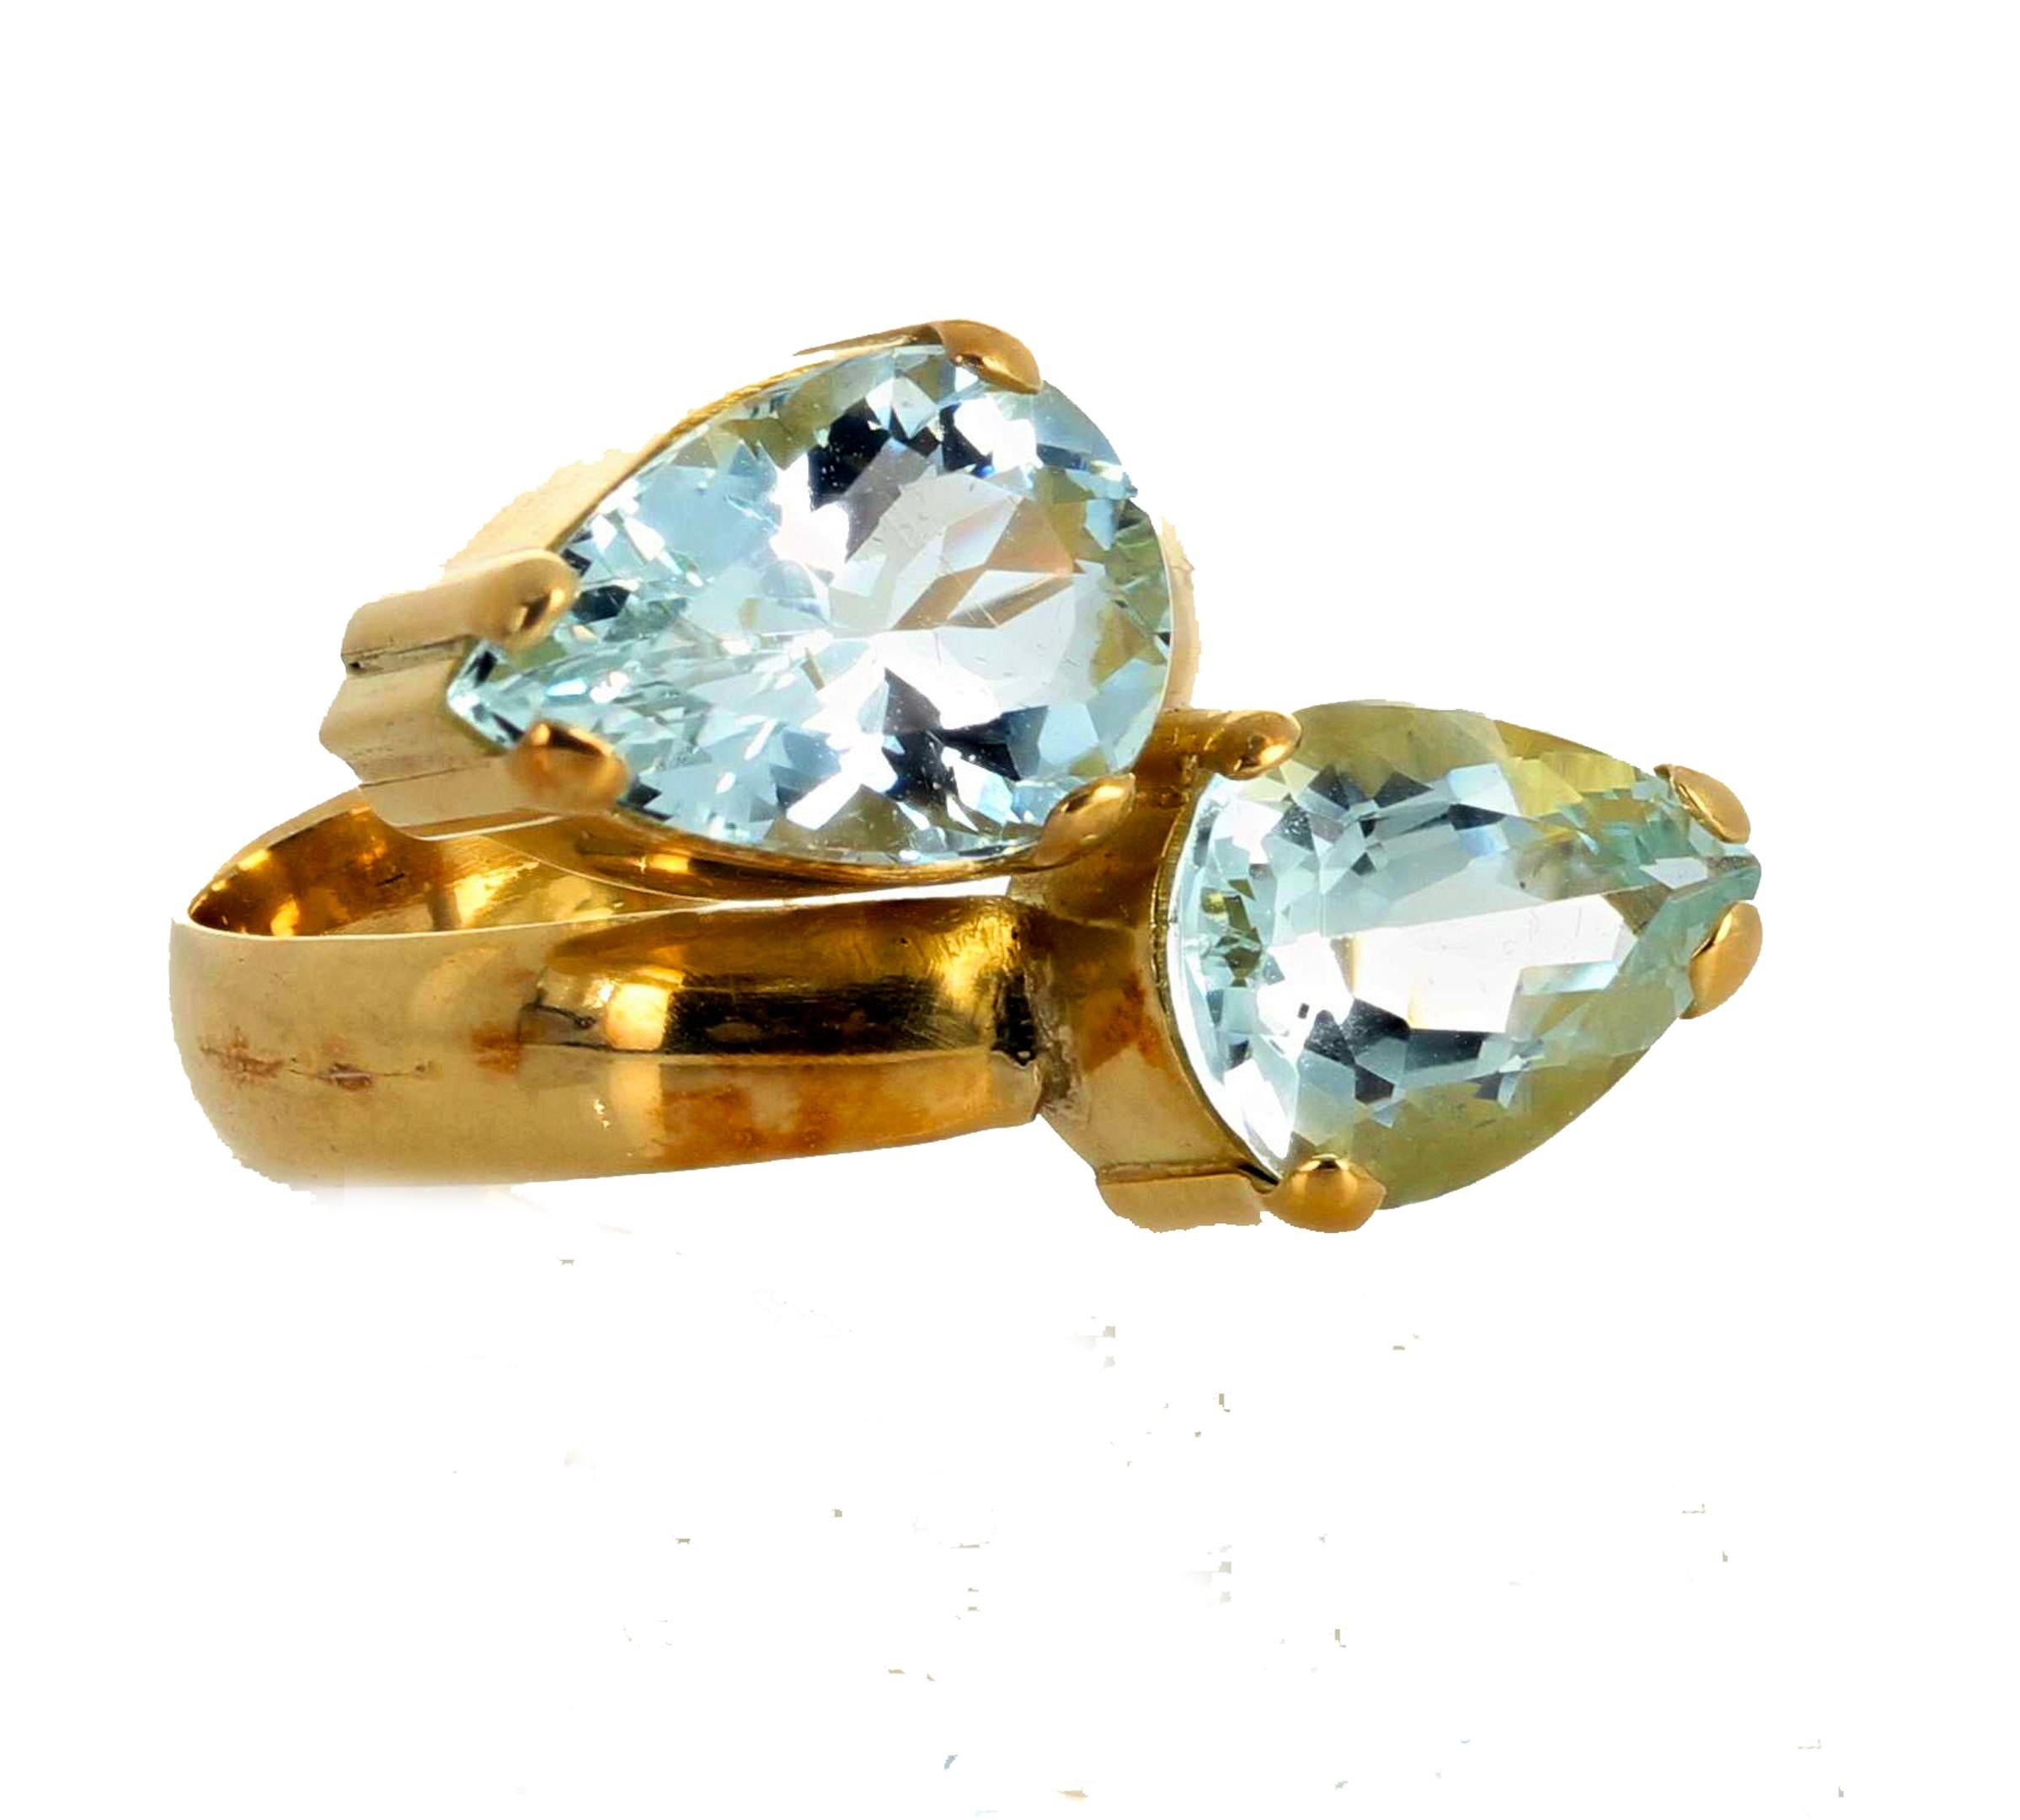 These spectacular silvery blue natural 6 carat Aquamarines are clear with no eye visible inclusions.  The beautiful handmade 18Kt yellow gold setting is a size 7.5 sizable by just pulling apart or squeezing together - you can do it yourself -  and